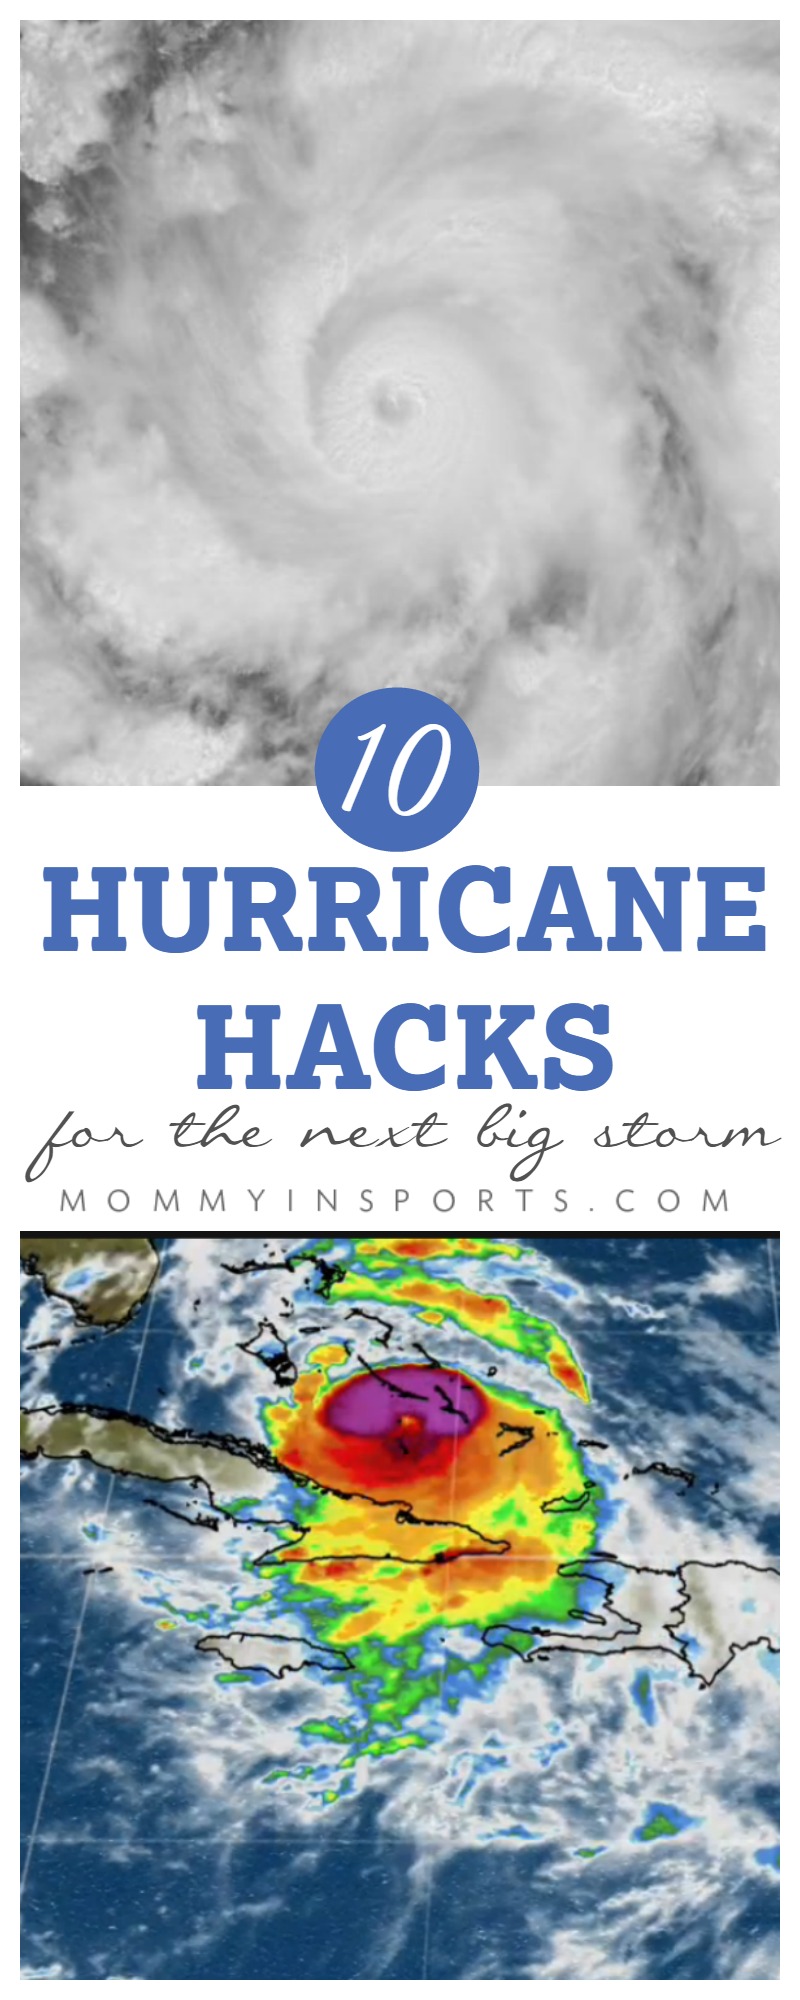 Hurricane blowing into town? Read what seasoned hurricane veterans do to prepare for the big storm. These 10 hurricane hacks will make surviving power outages more comfortable.